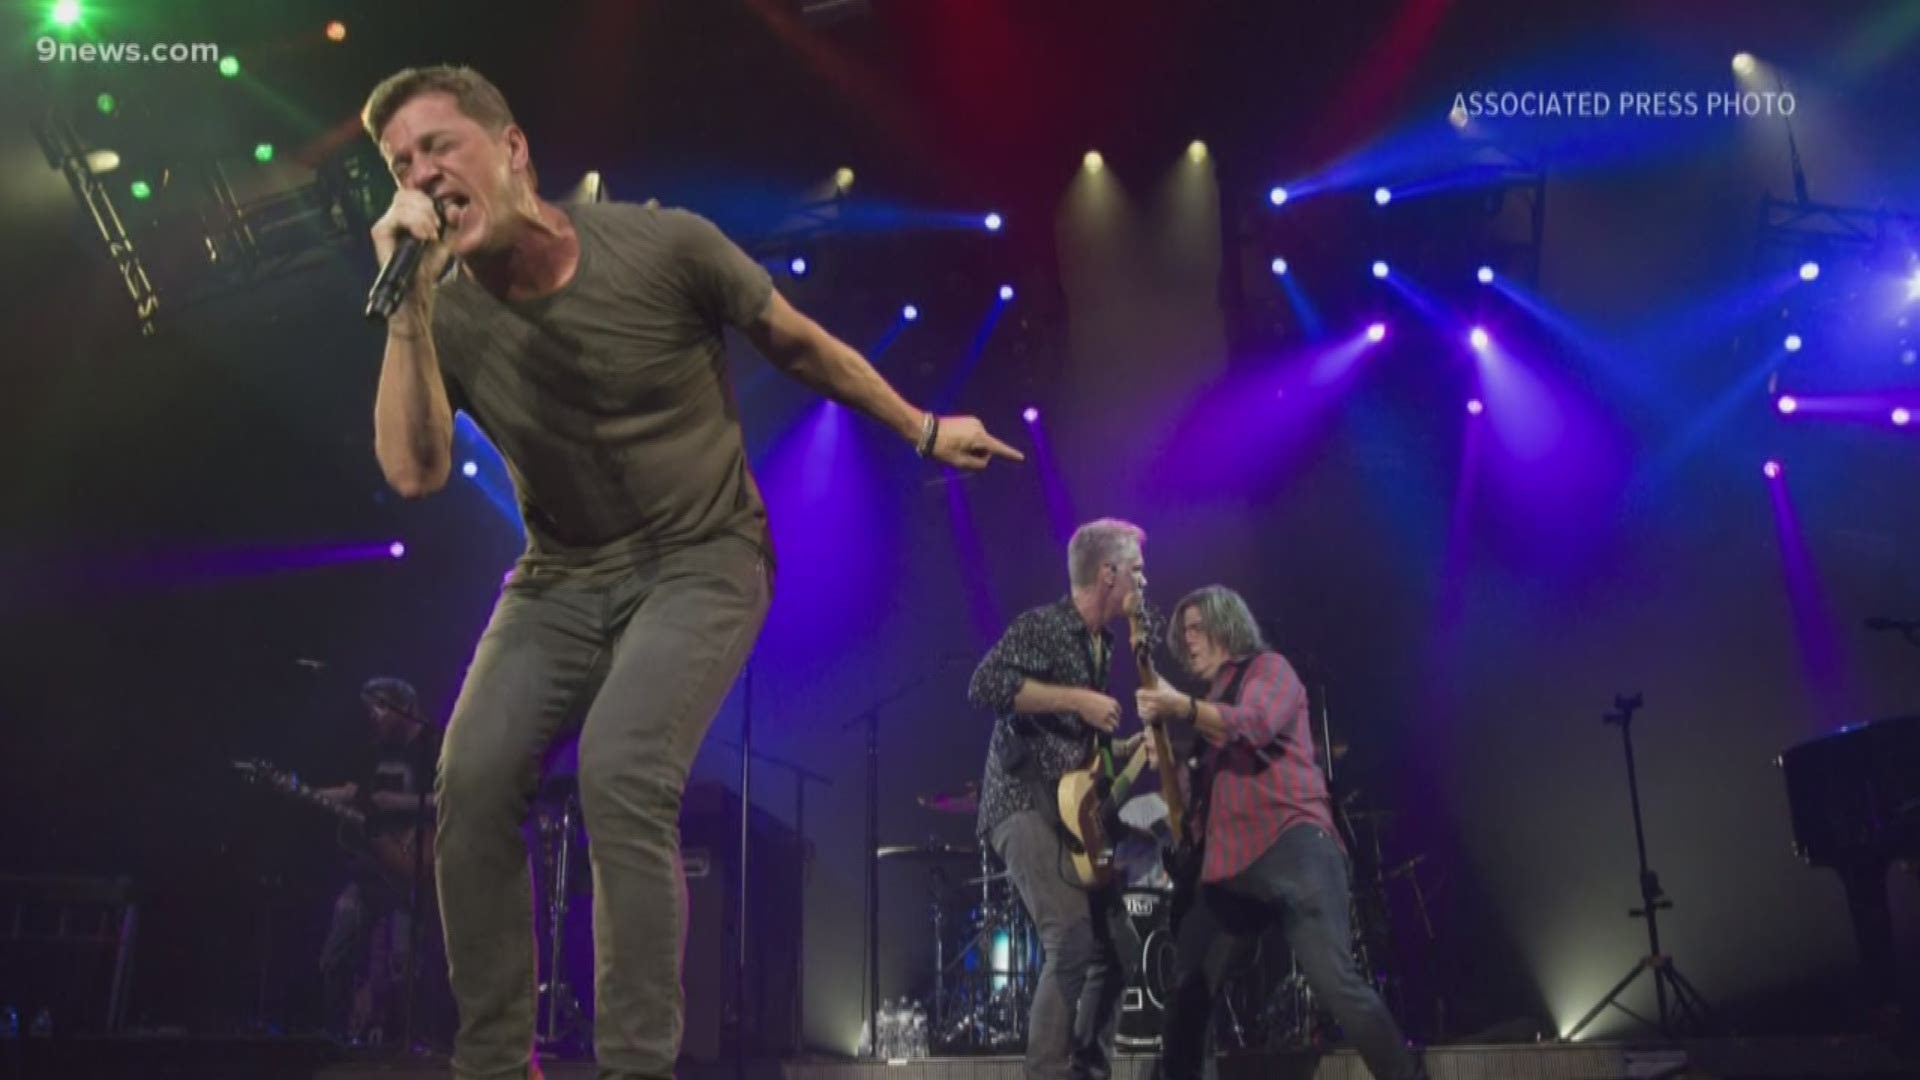 The Rob Thomas-led band will bring their North American tour to Denver on Thursday, Sept. 10.